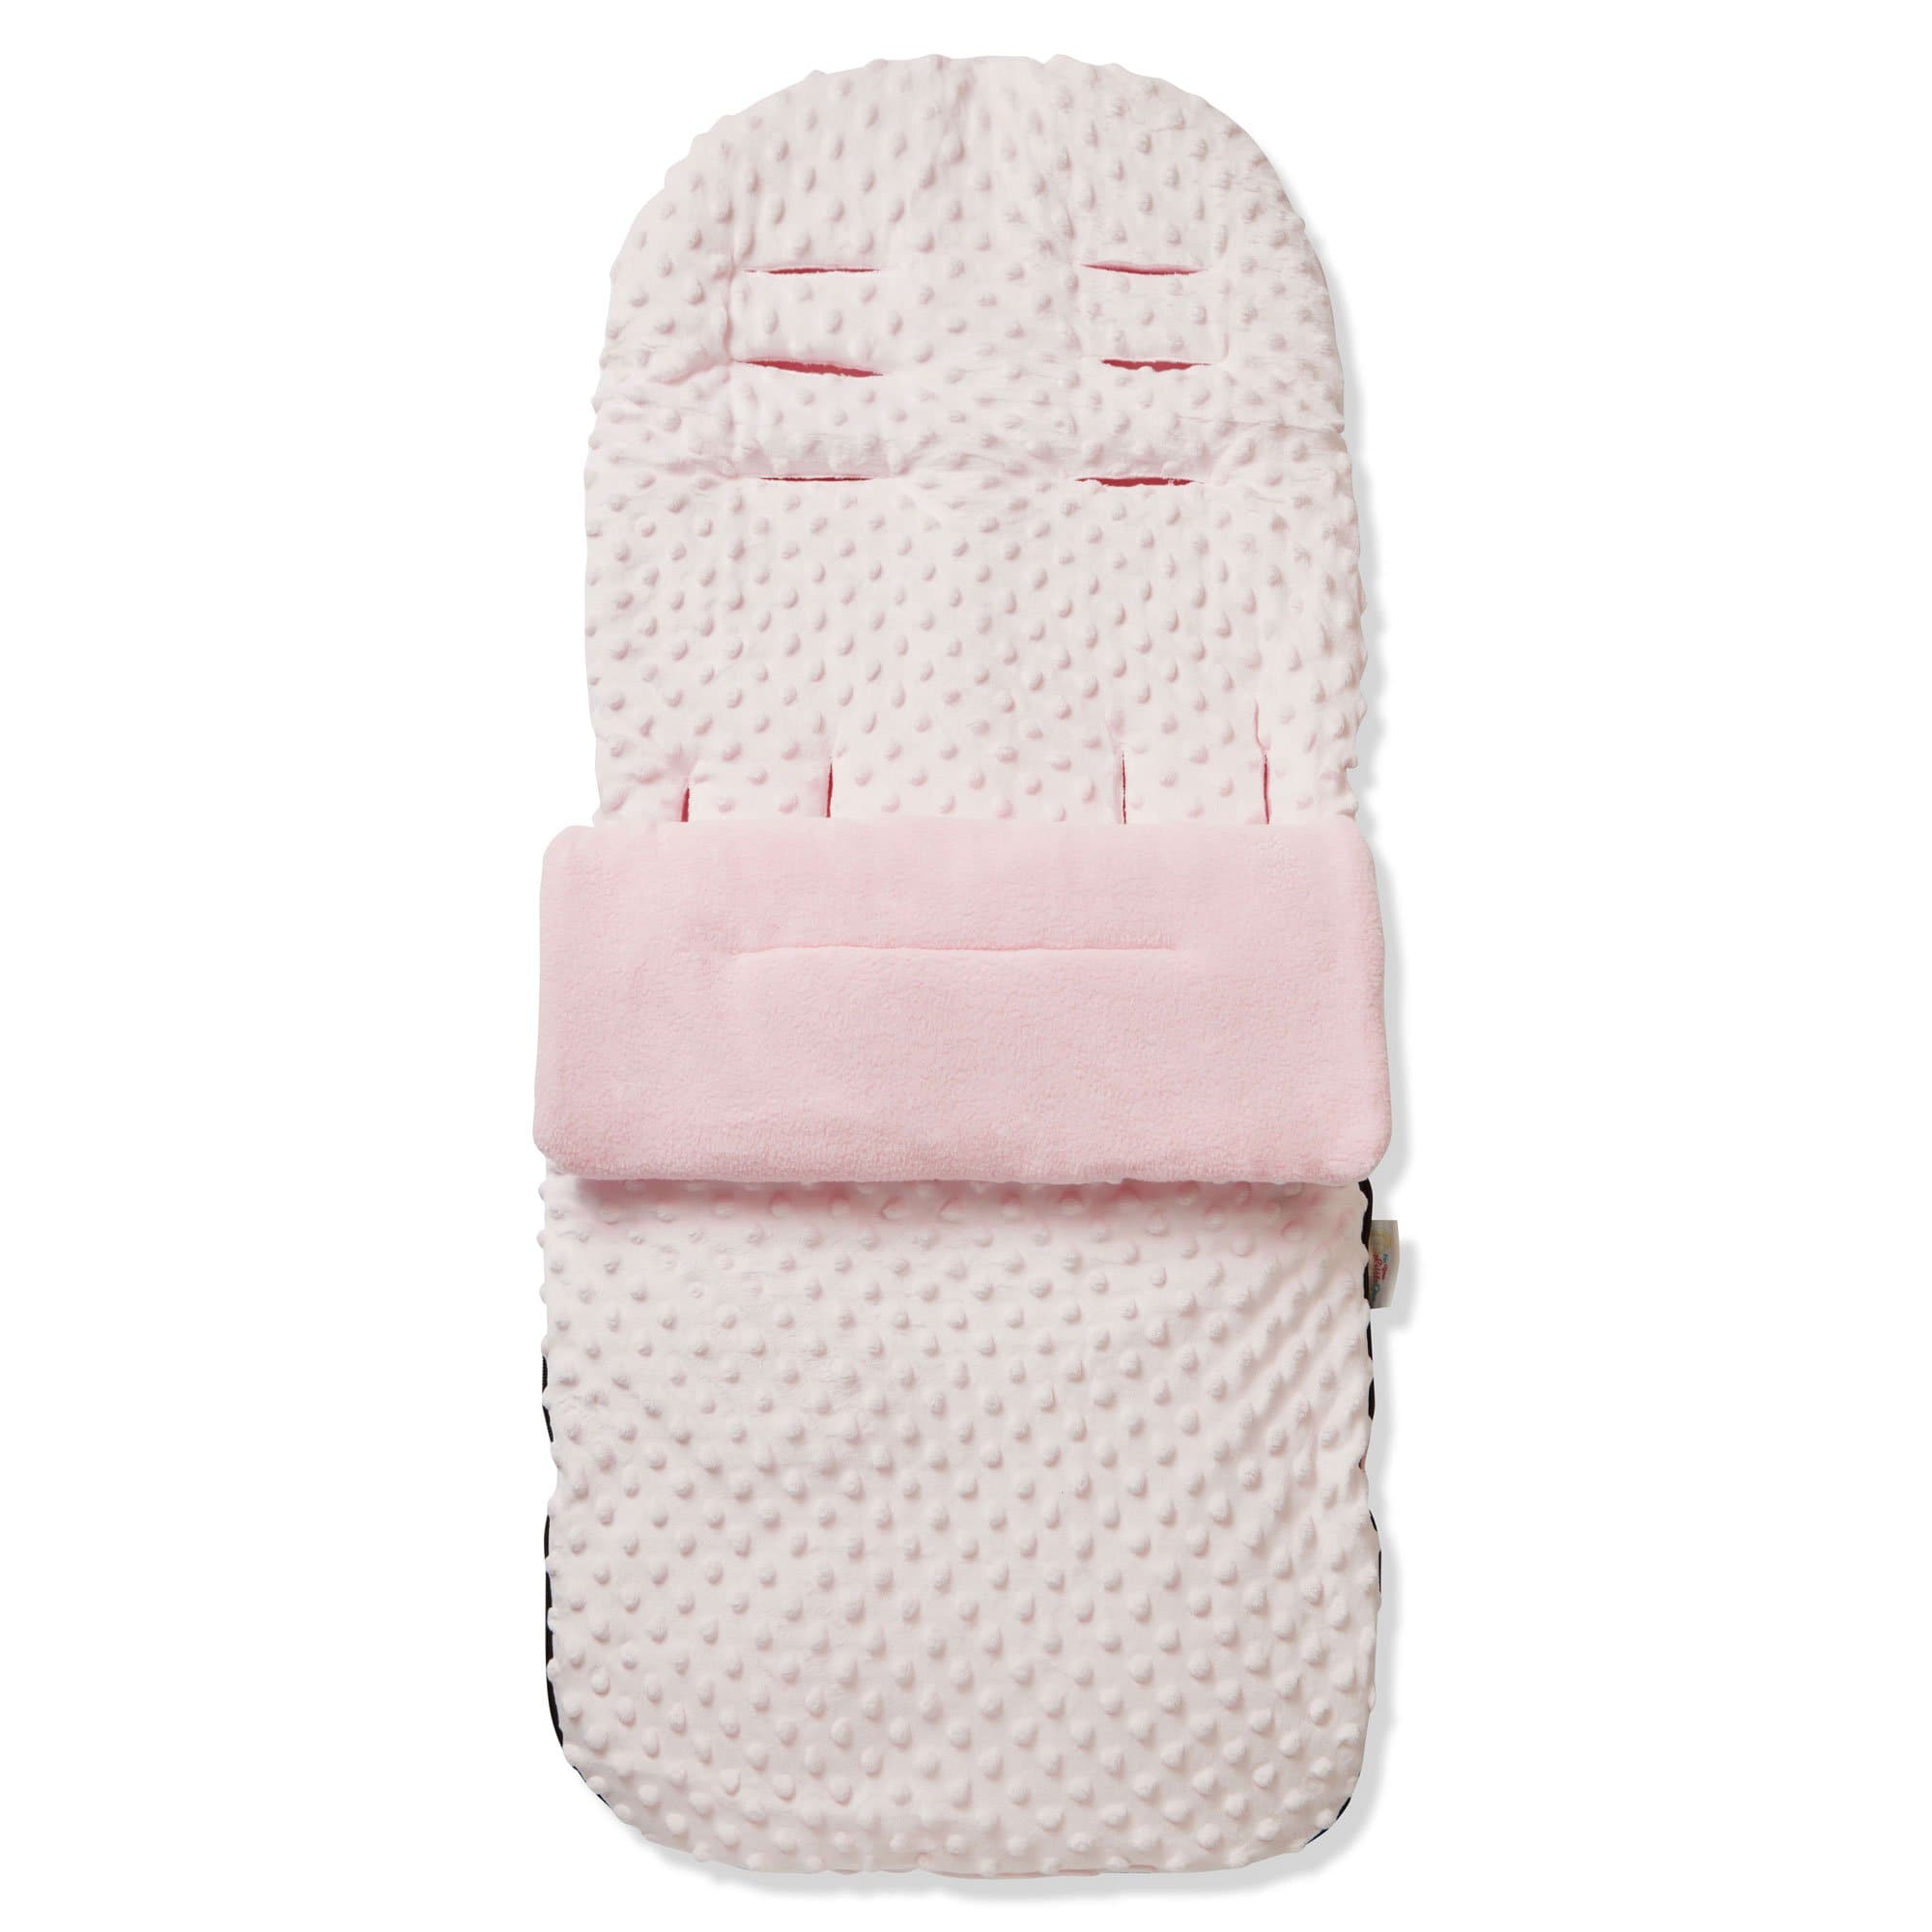 Dimple Footmuff / Cosy Toes Compatible with Jane - Pink / Fits All Models | For Your Little One